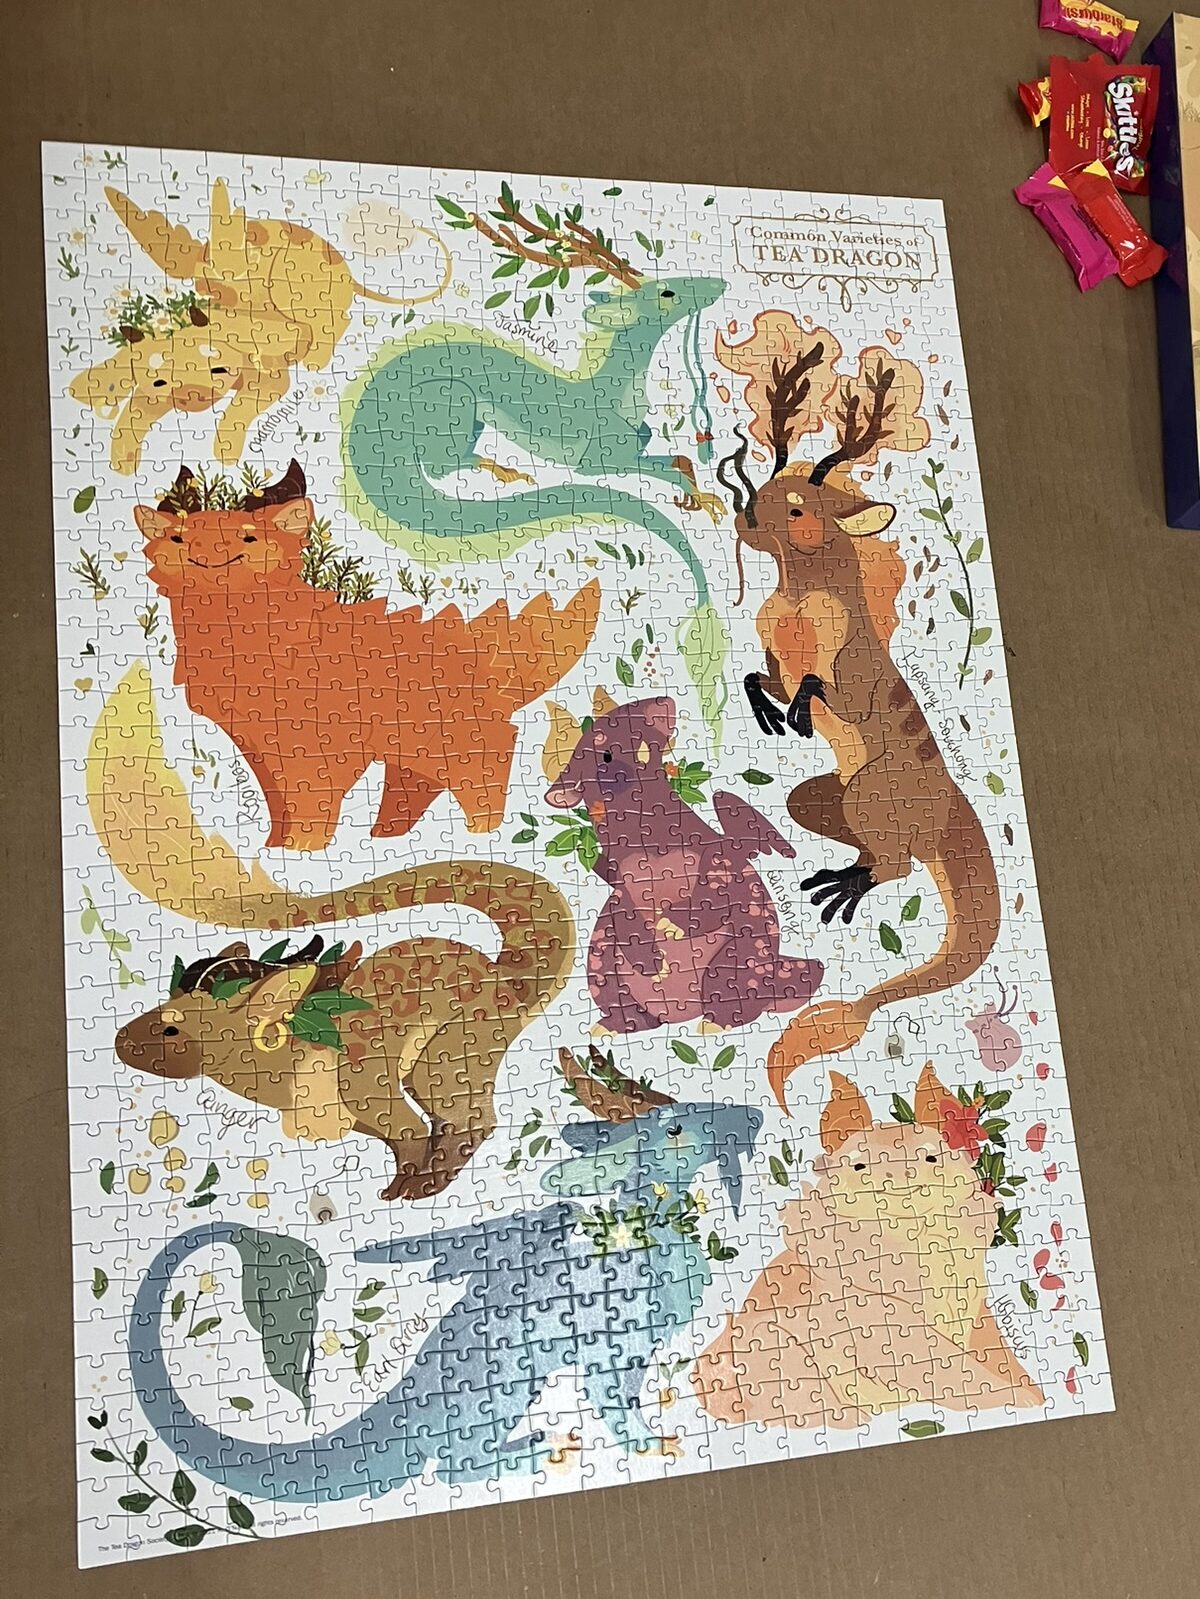 A completed 1000 piece puzzle of eight cartoon dragons themed after different teas.